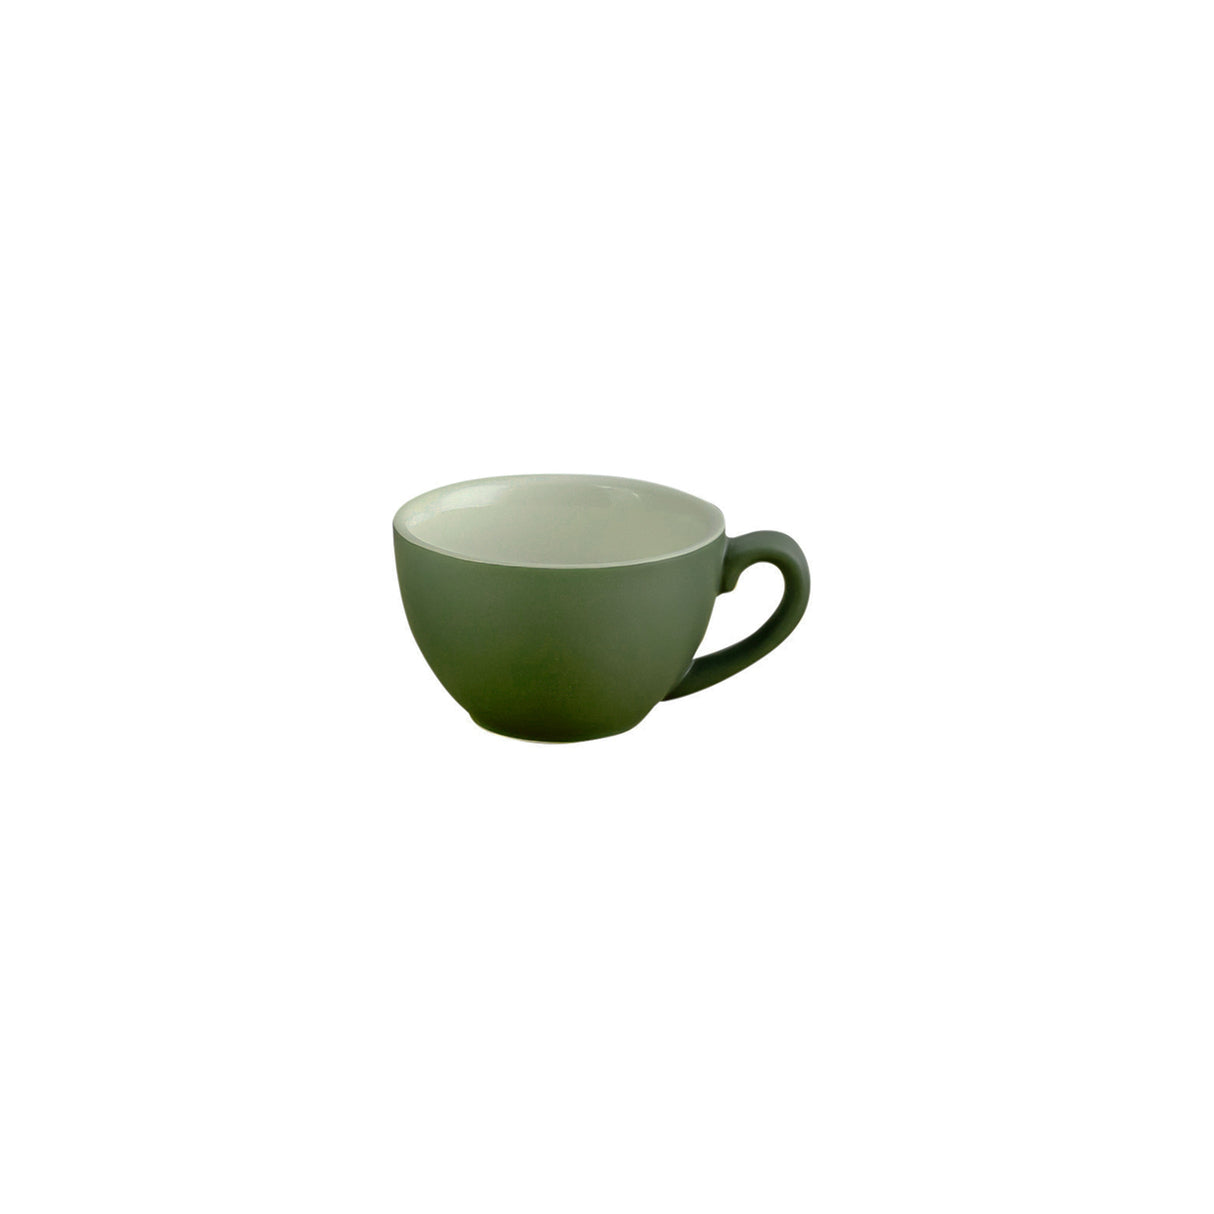 Cappuccino Cup - Sage, 200ml, Intorno: Pack of 6